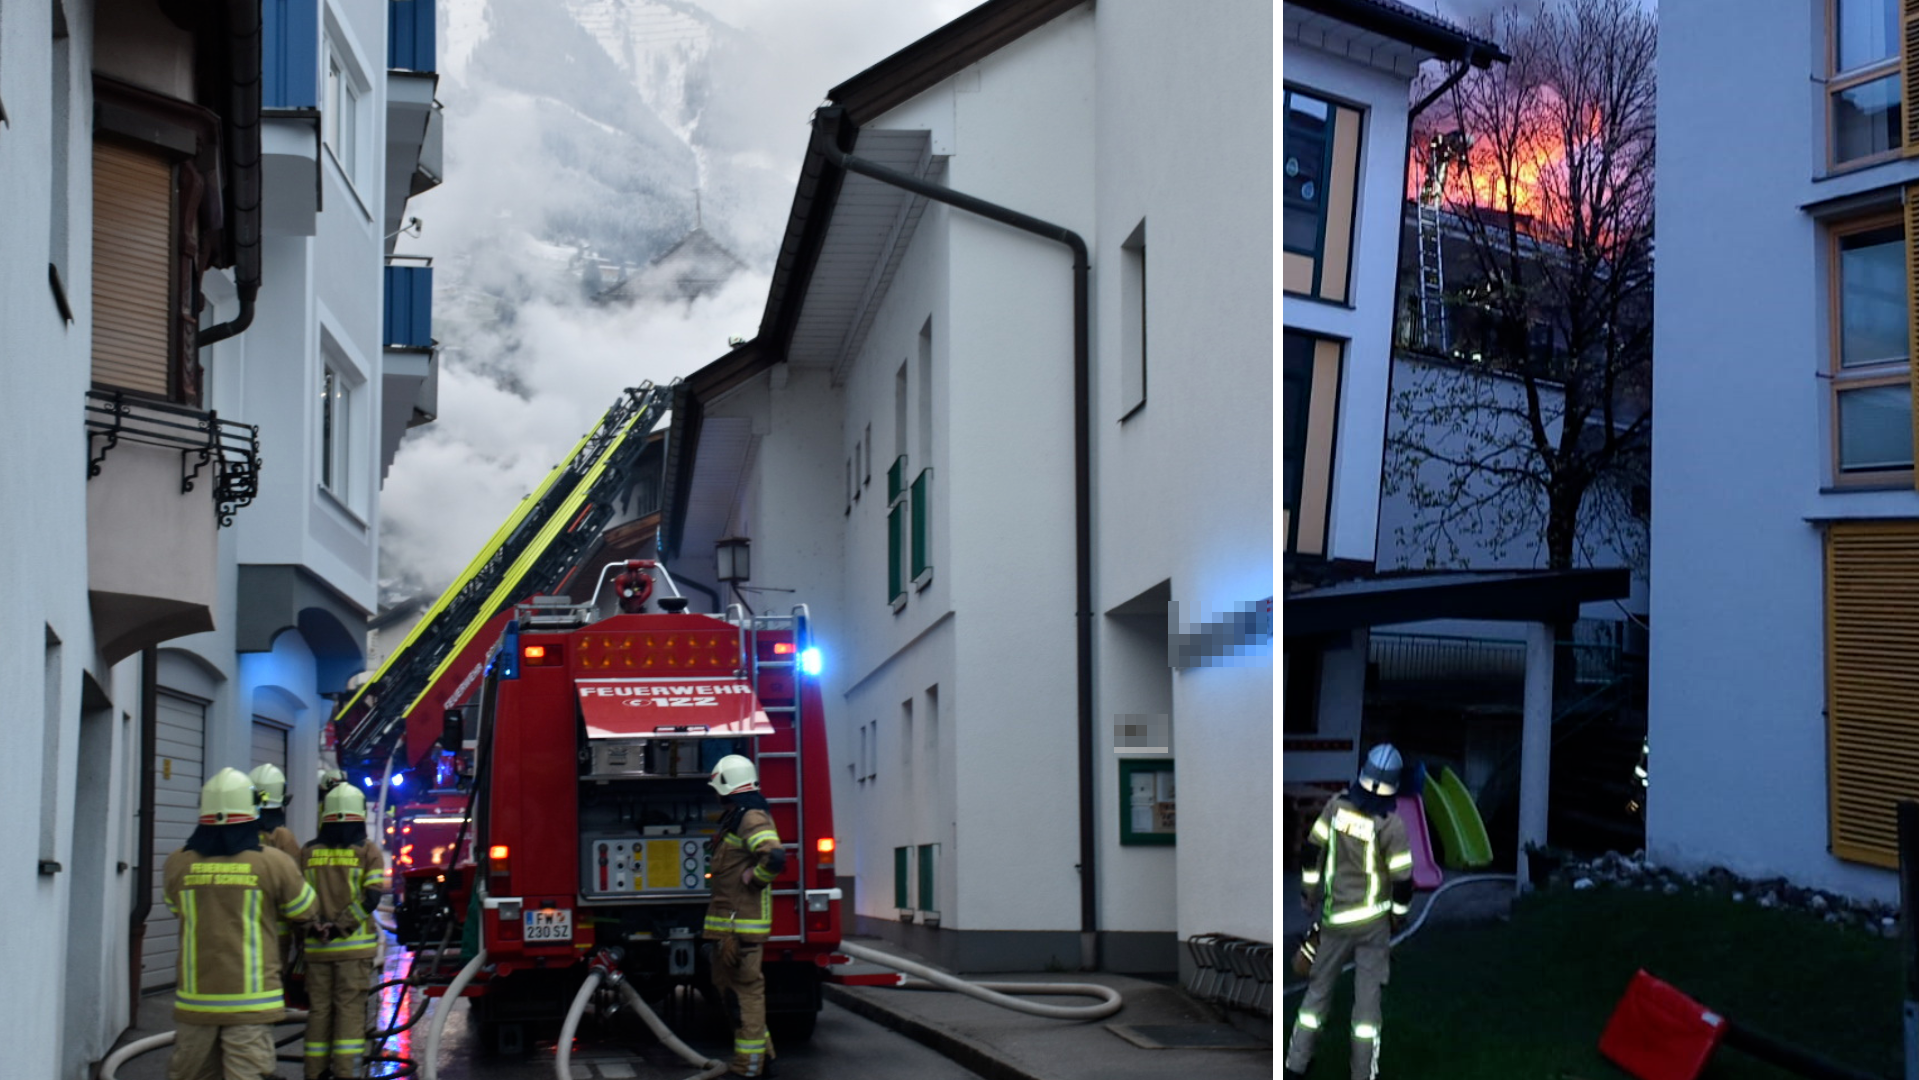 The fire department was deployed in the densely built-up city center of Schwaz on Sunday morning. (Bild: zoom.tirol)